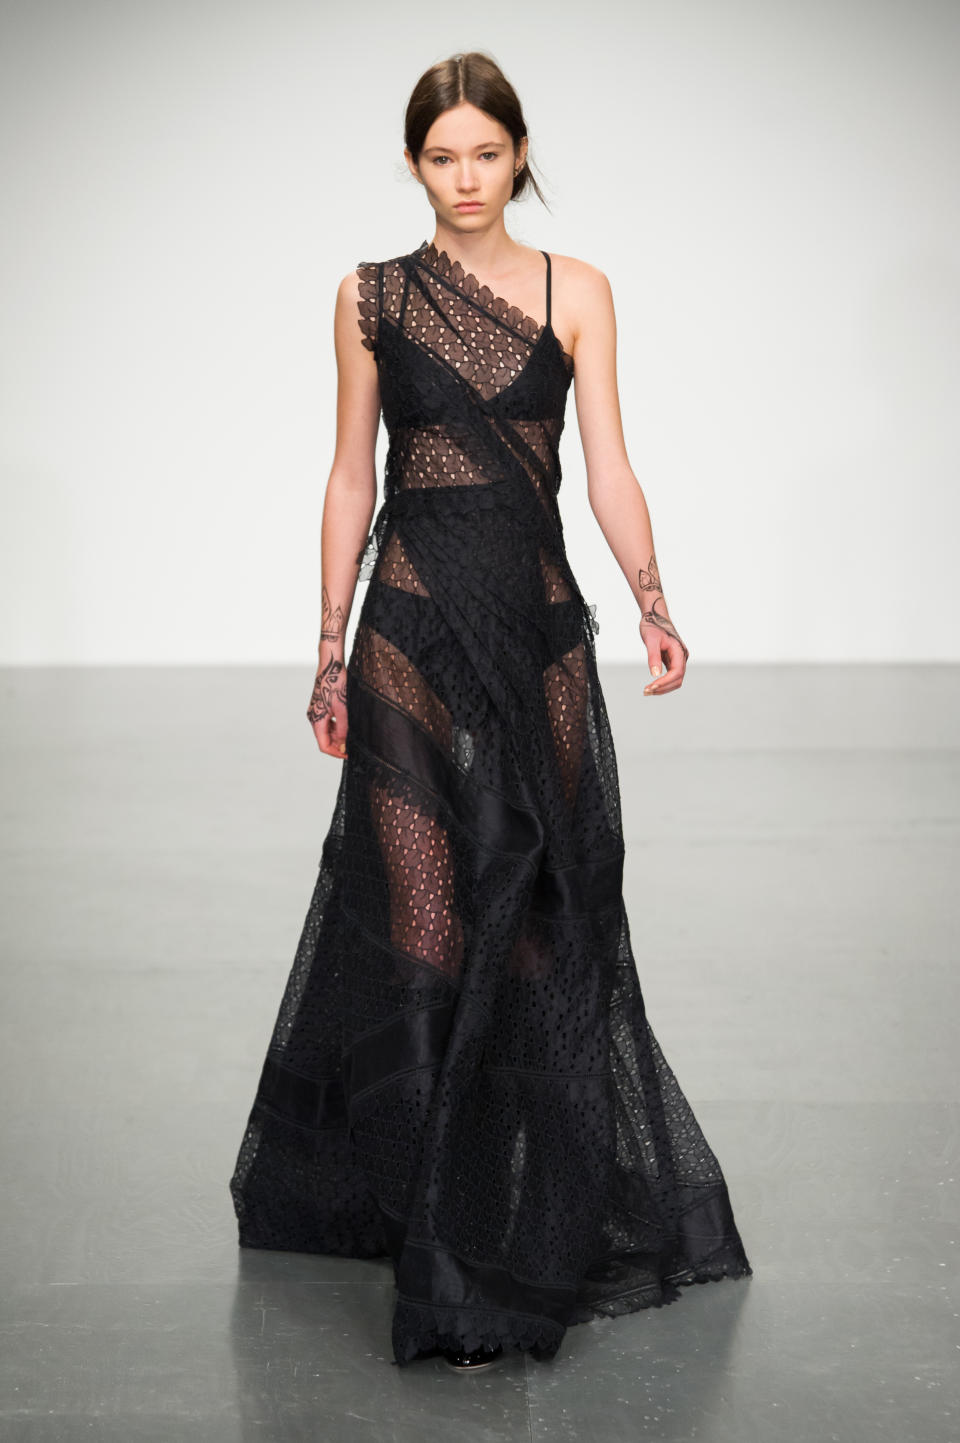 <p><i>Black sheer-lace dress from the SS18 Antonio Berardi collection. (Photo: IMAXtree) </i></p>